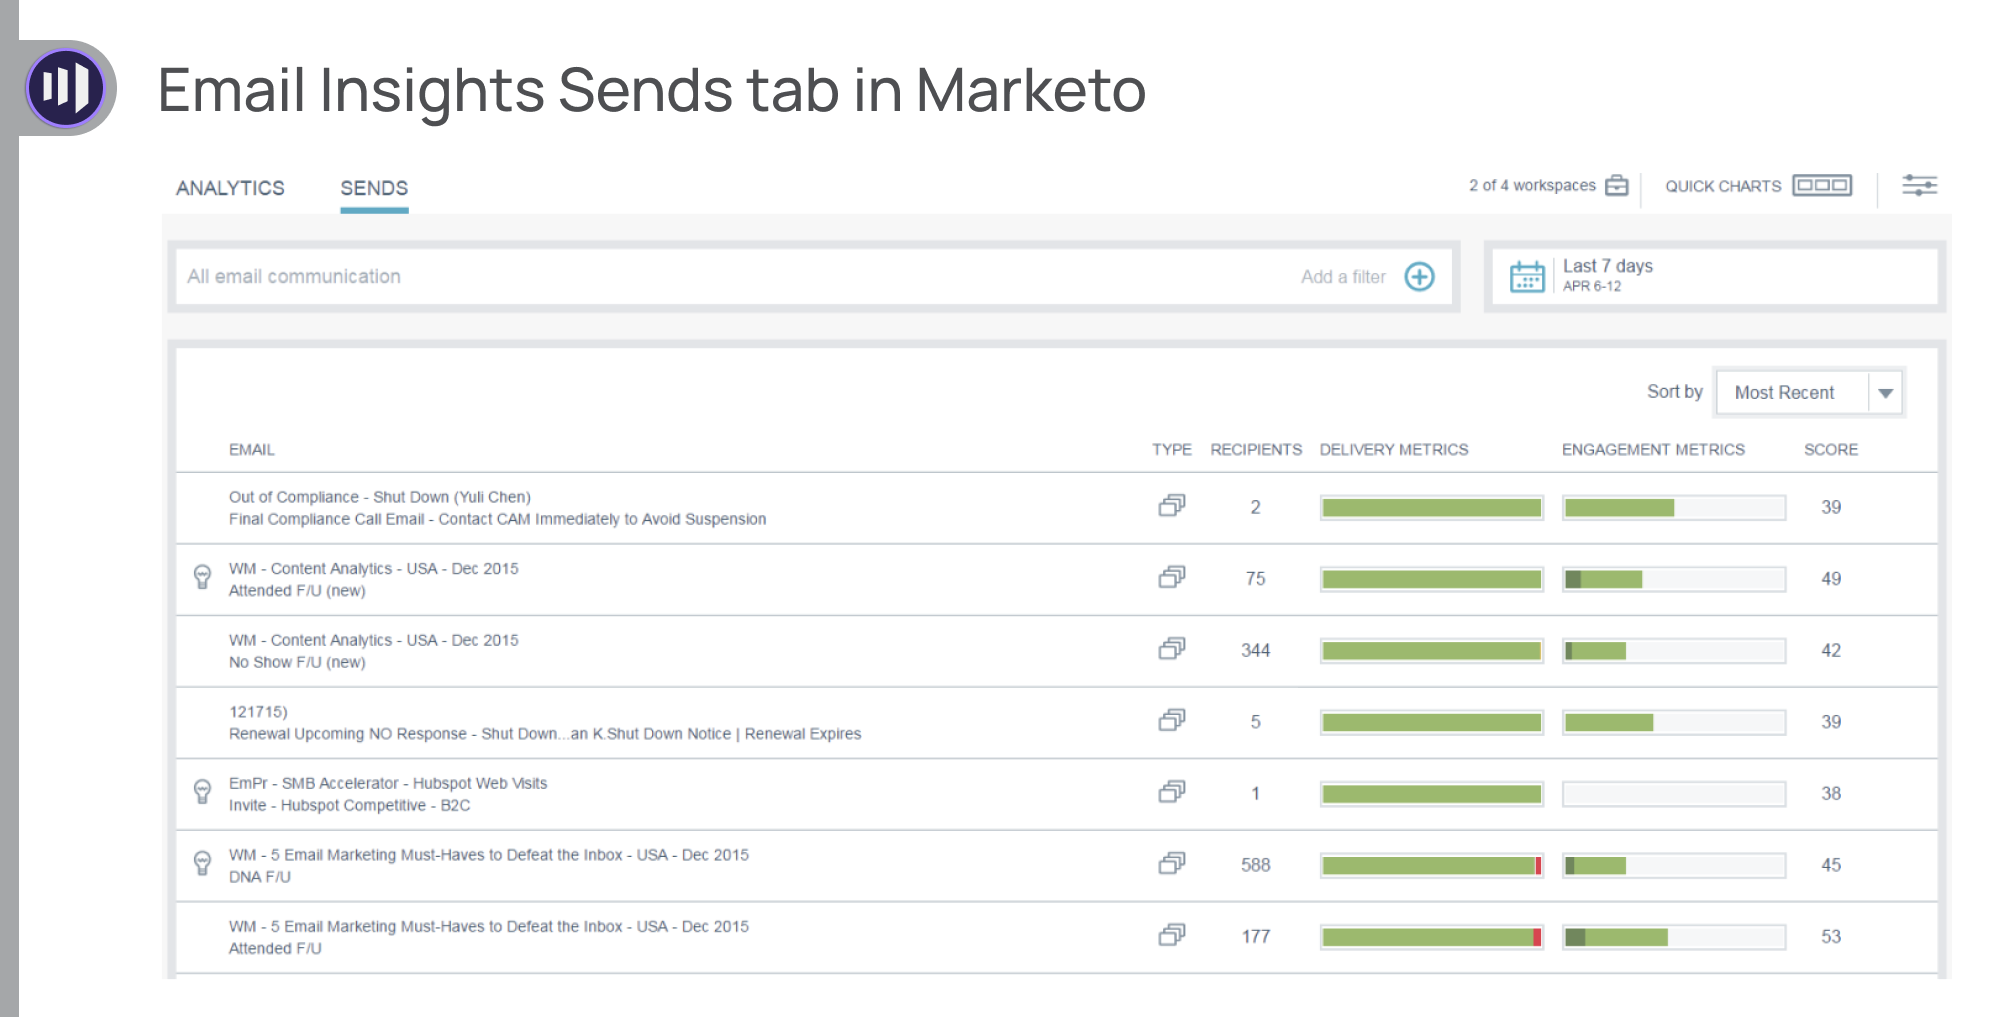 Email Insights Sends tab in Marketo